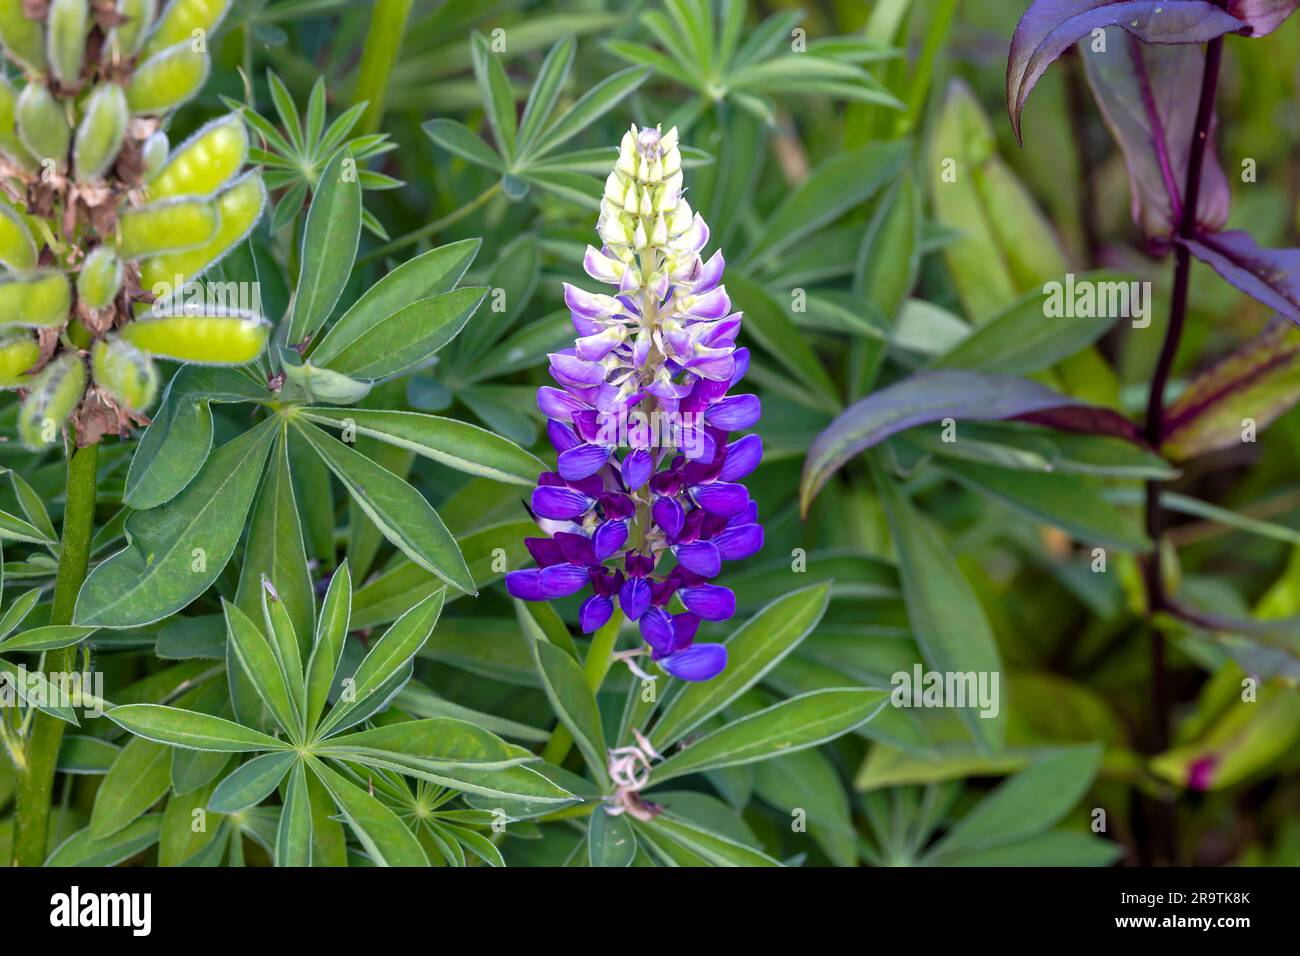 The lupin or lupine (Lupinus perennis) ornamental plants, but are invasive to some areas. Stock Photo